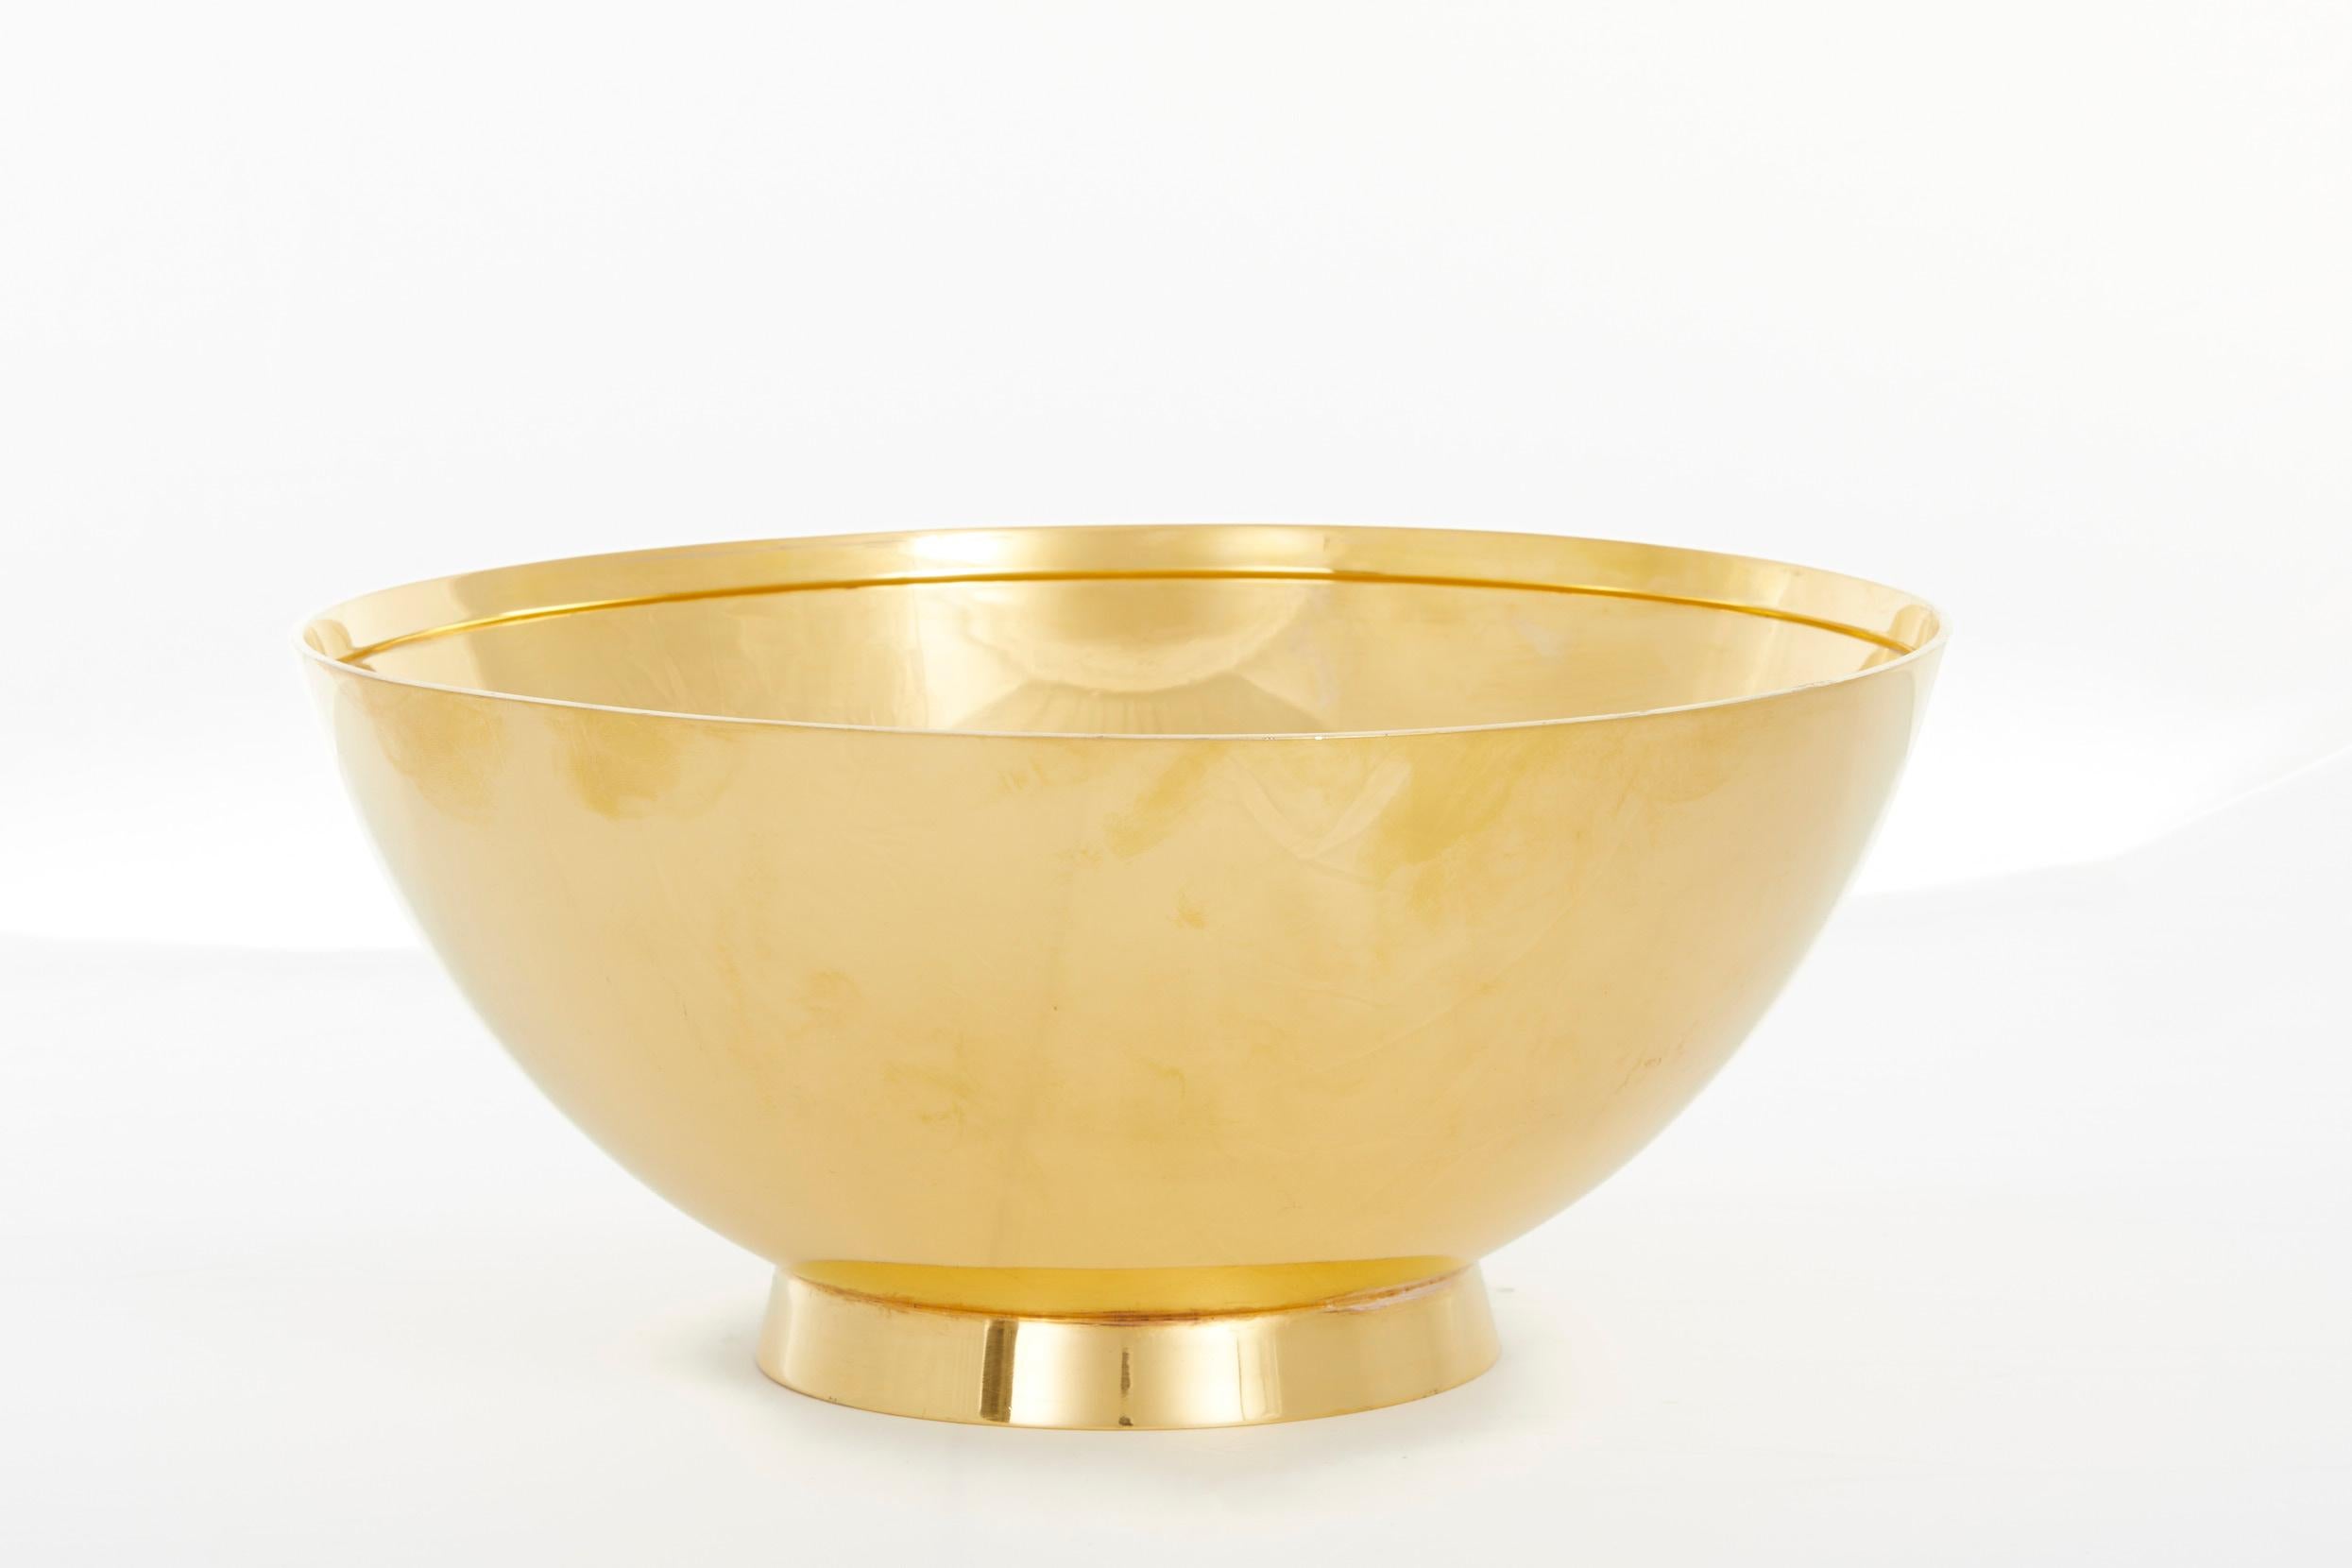 Tiffany & Co. Sterling Silver / Gilt Punch Bowl Service / 8 People For Sale 8